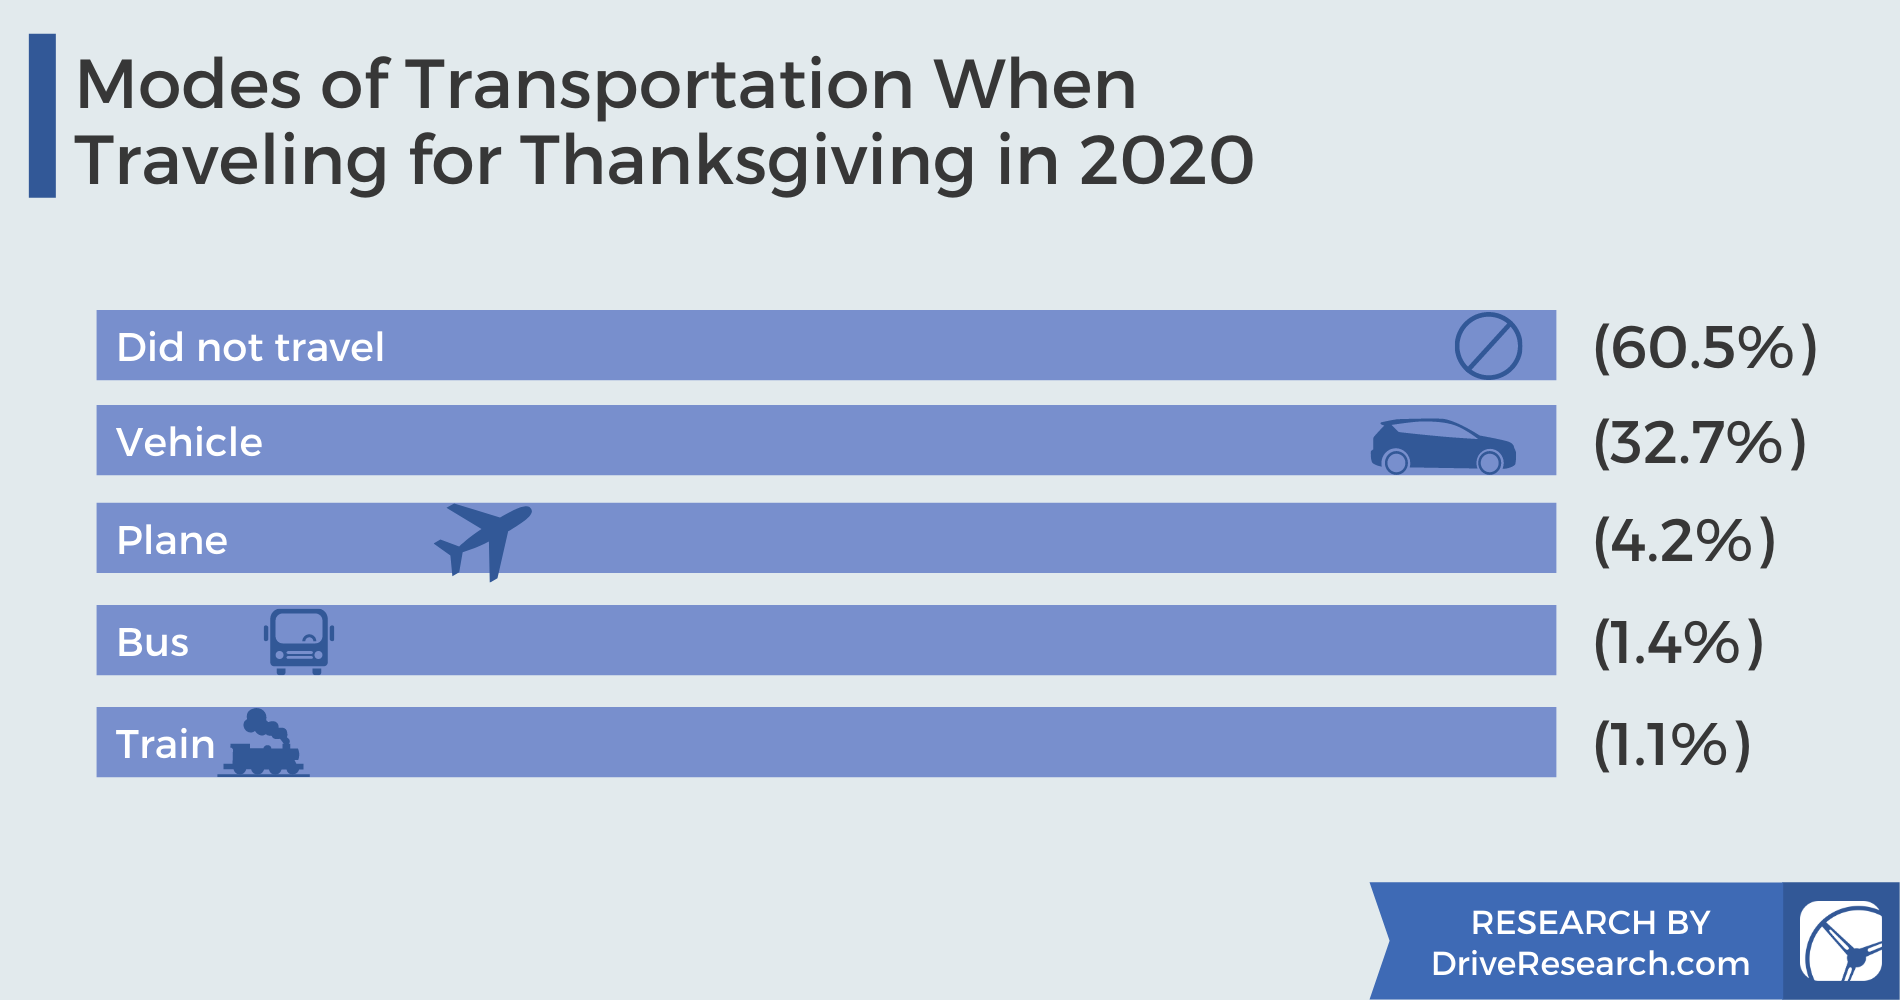 Modes of transportation when traveling for thanksgiving in 2020